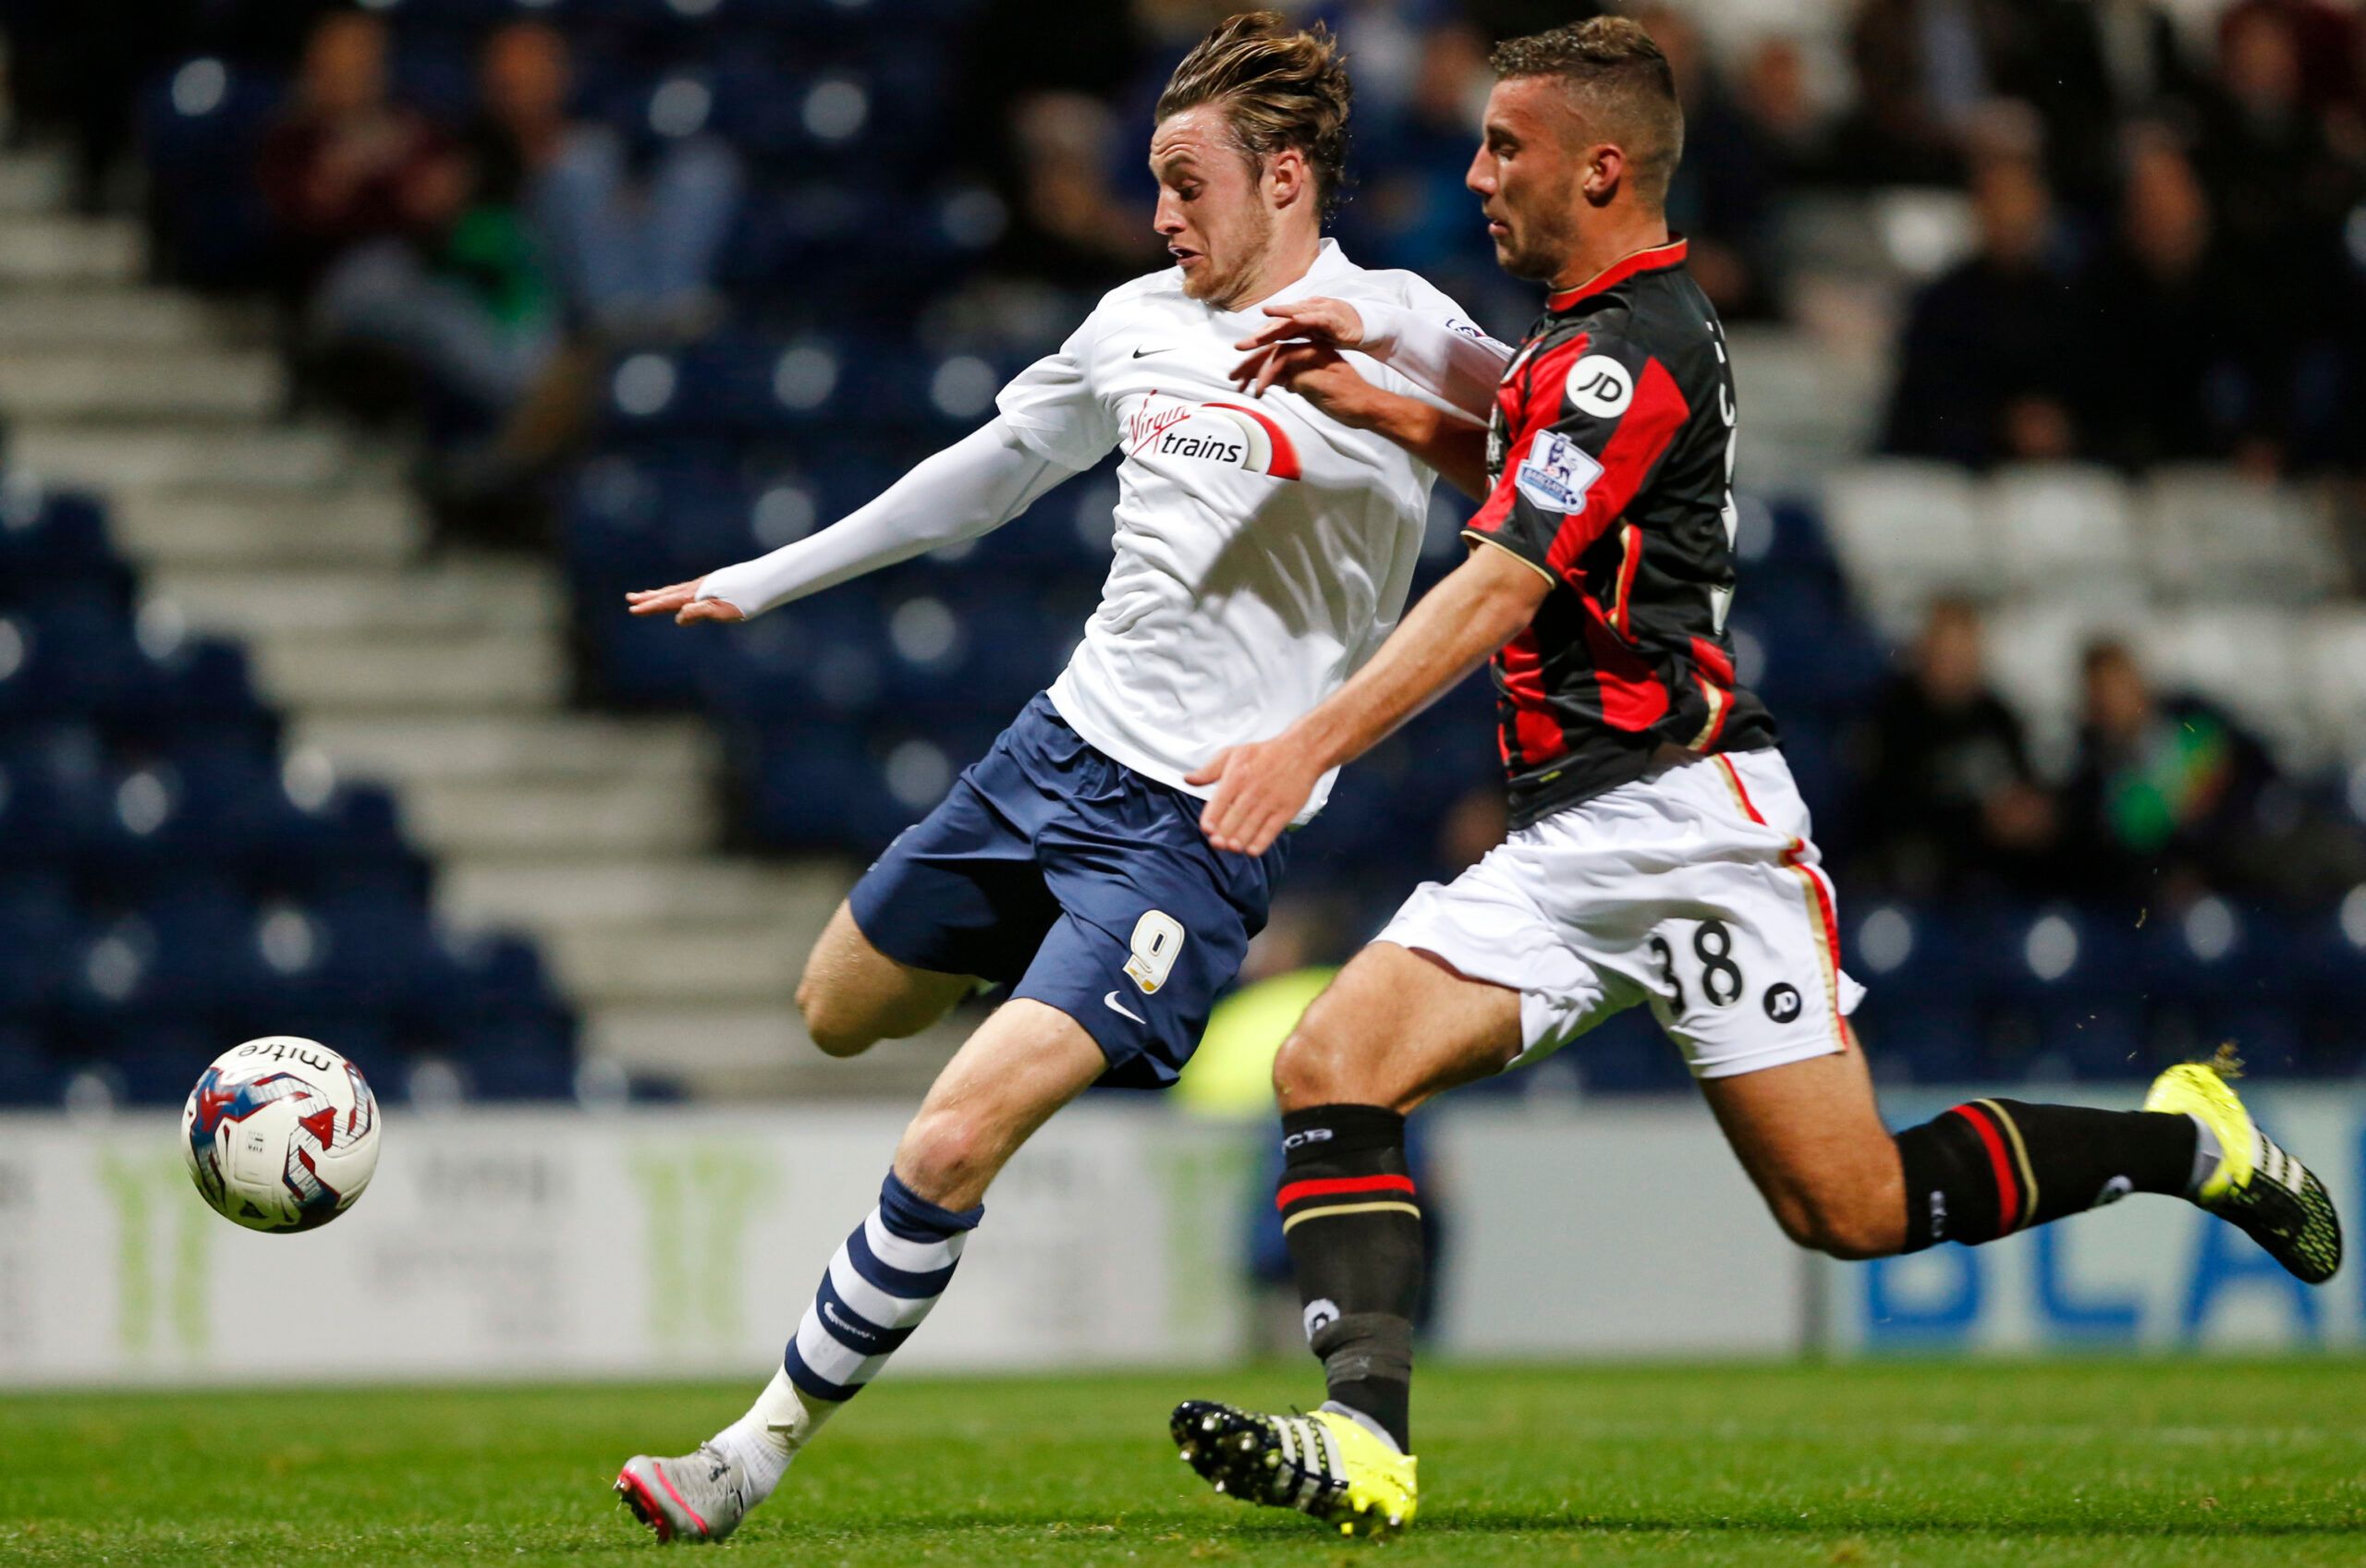 Football - Preston North End v AFC Bournemouth - Capital One Cup Third Round - Deepdale - 22/9/15 
Preston's Will Keane in action with Bournemouth's Baily Cargill  
Mandatory Credit: Action Images / Carl Recine 
Livepic 
EDITORIAL USE ONLY. No use with unauthorized audio, video, data, fixture lists, club/league logos or 